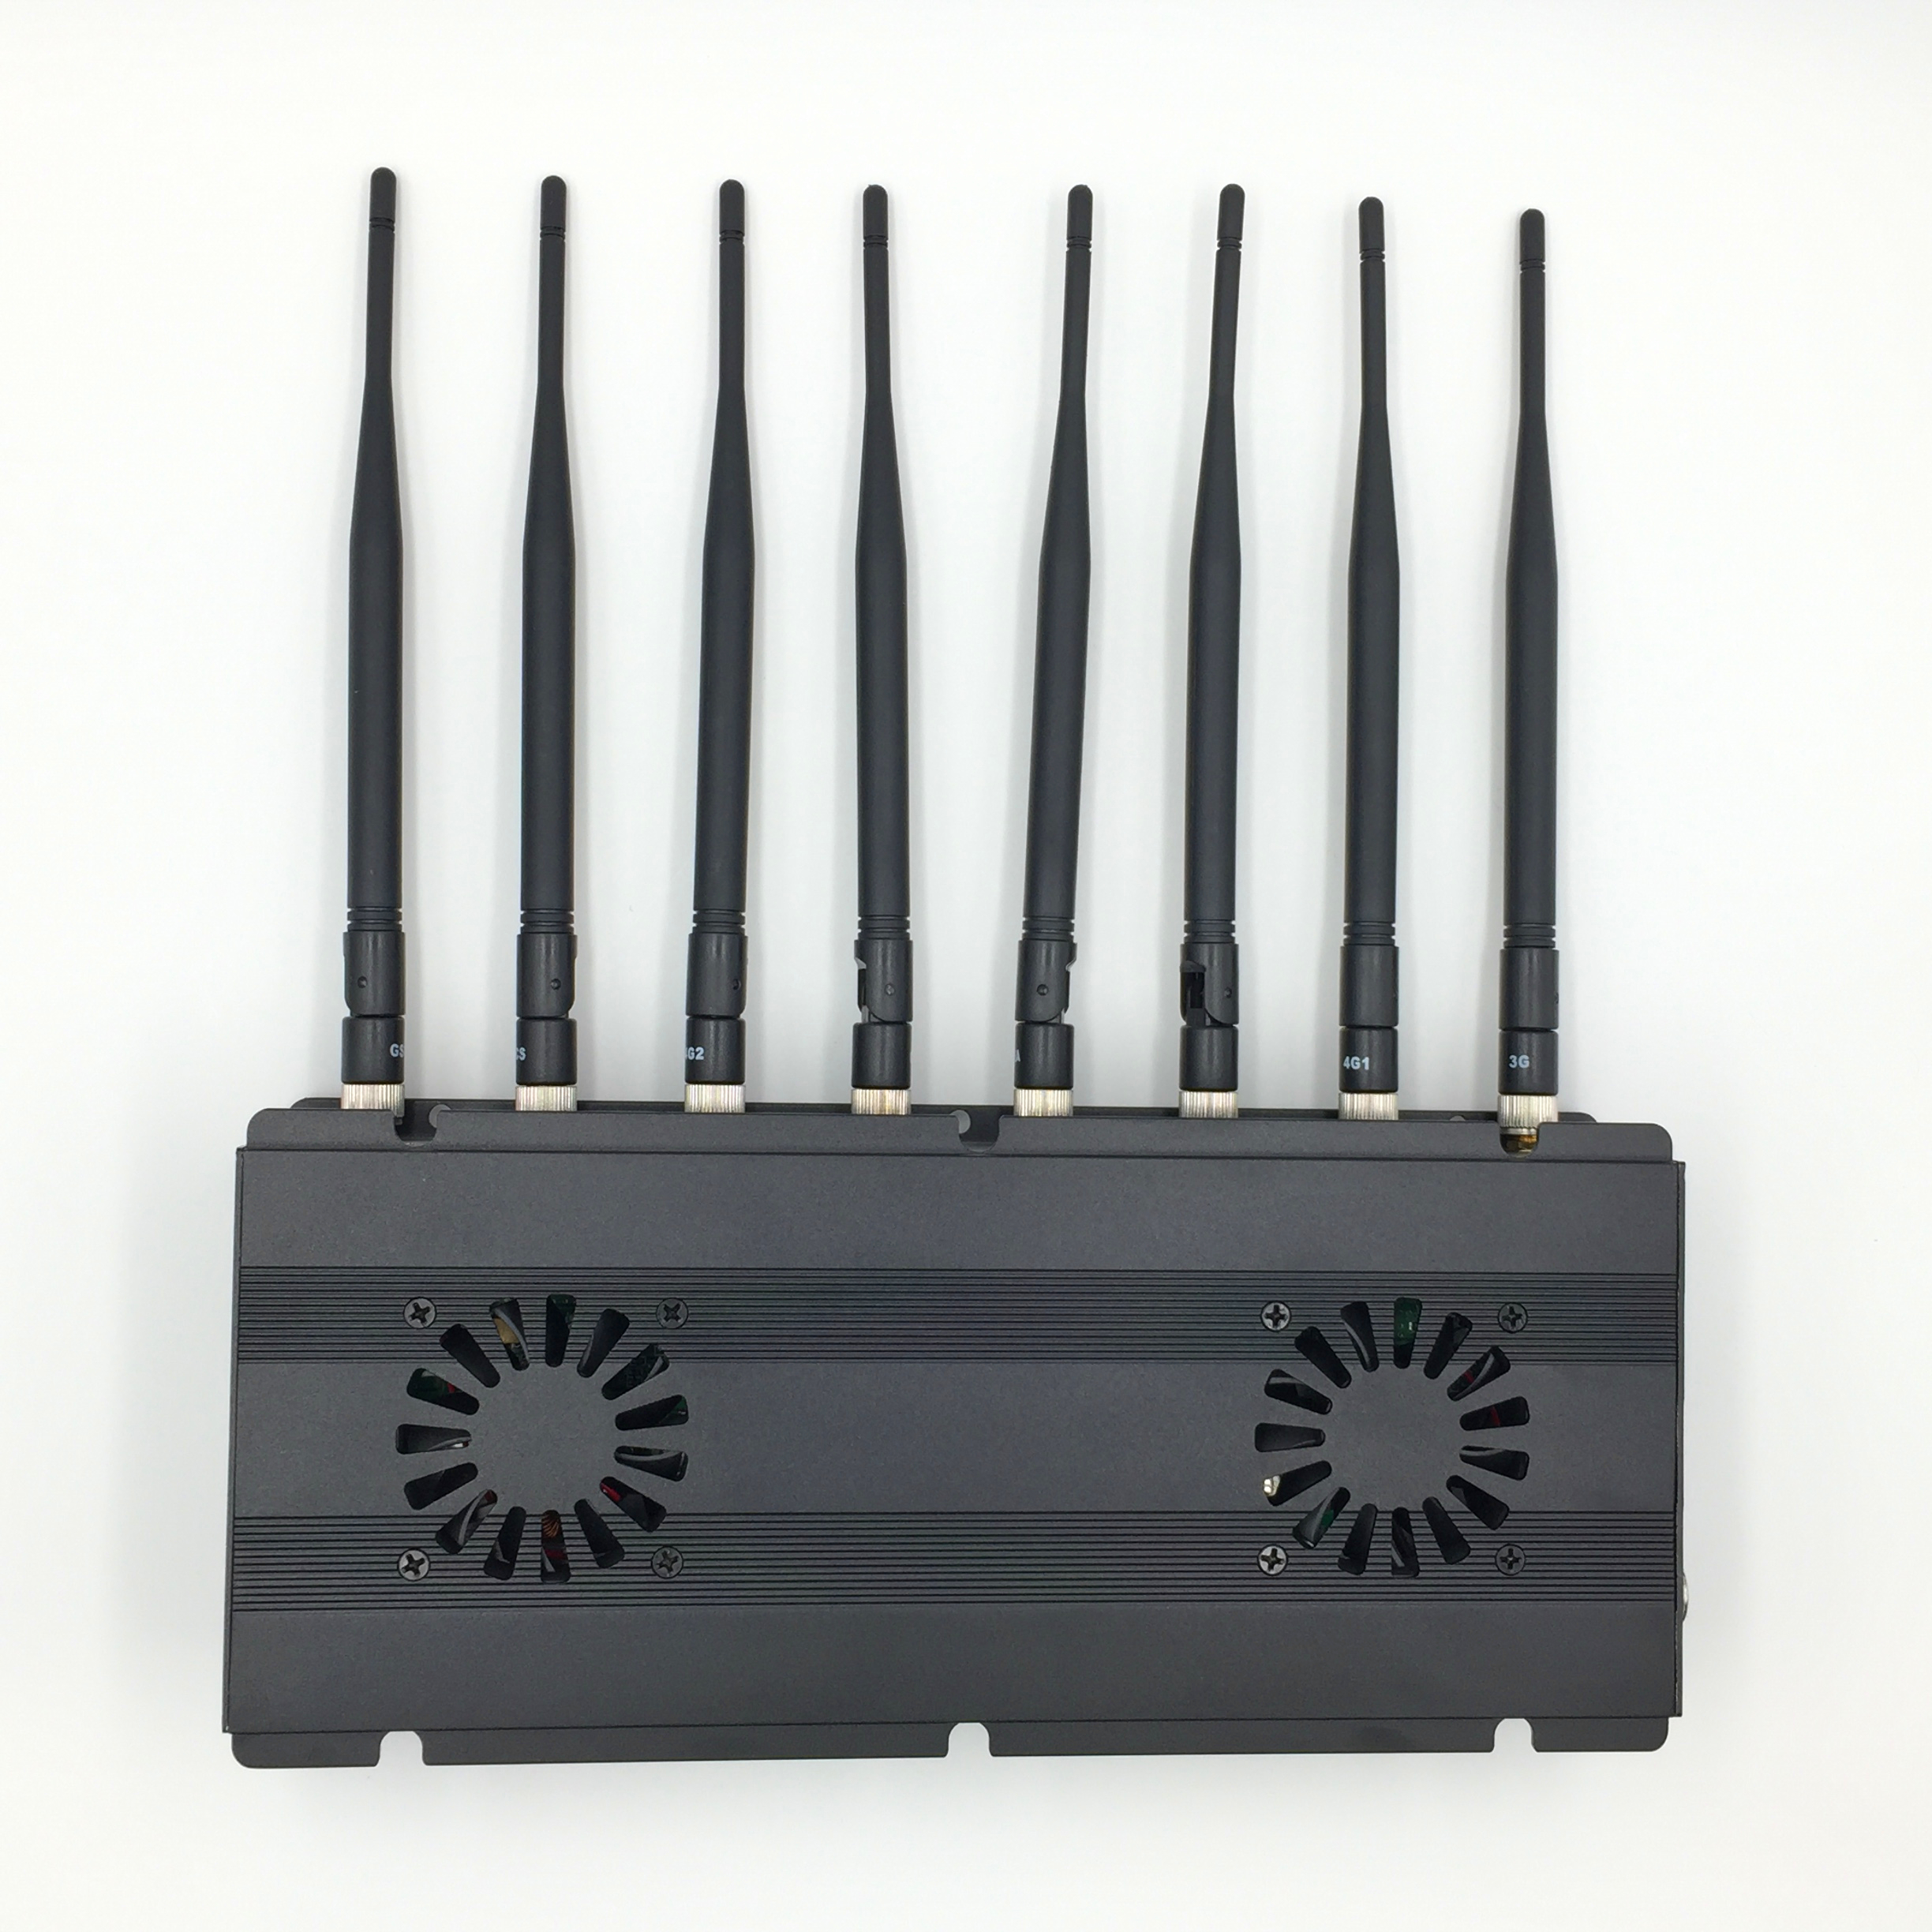 jammer kit lowes deck | Black Desktop 8 Antenna Signal Jammers With GSM 3G 4G GPS WiFi LOJACK